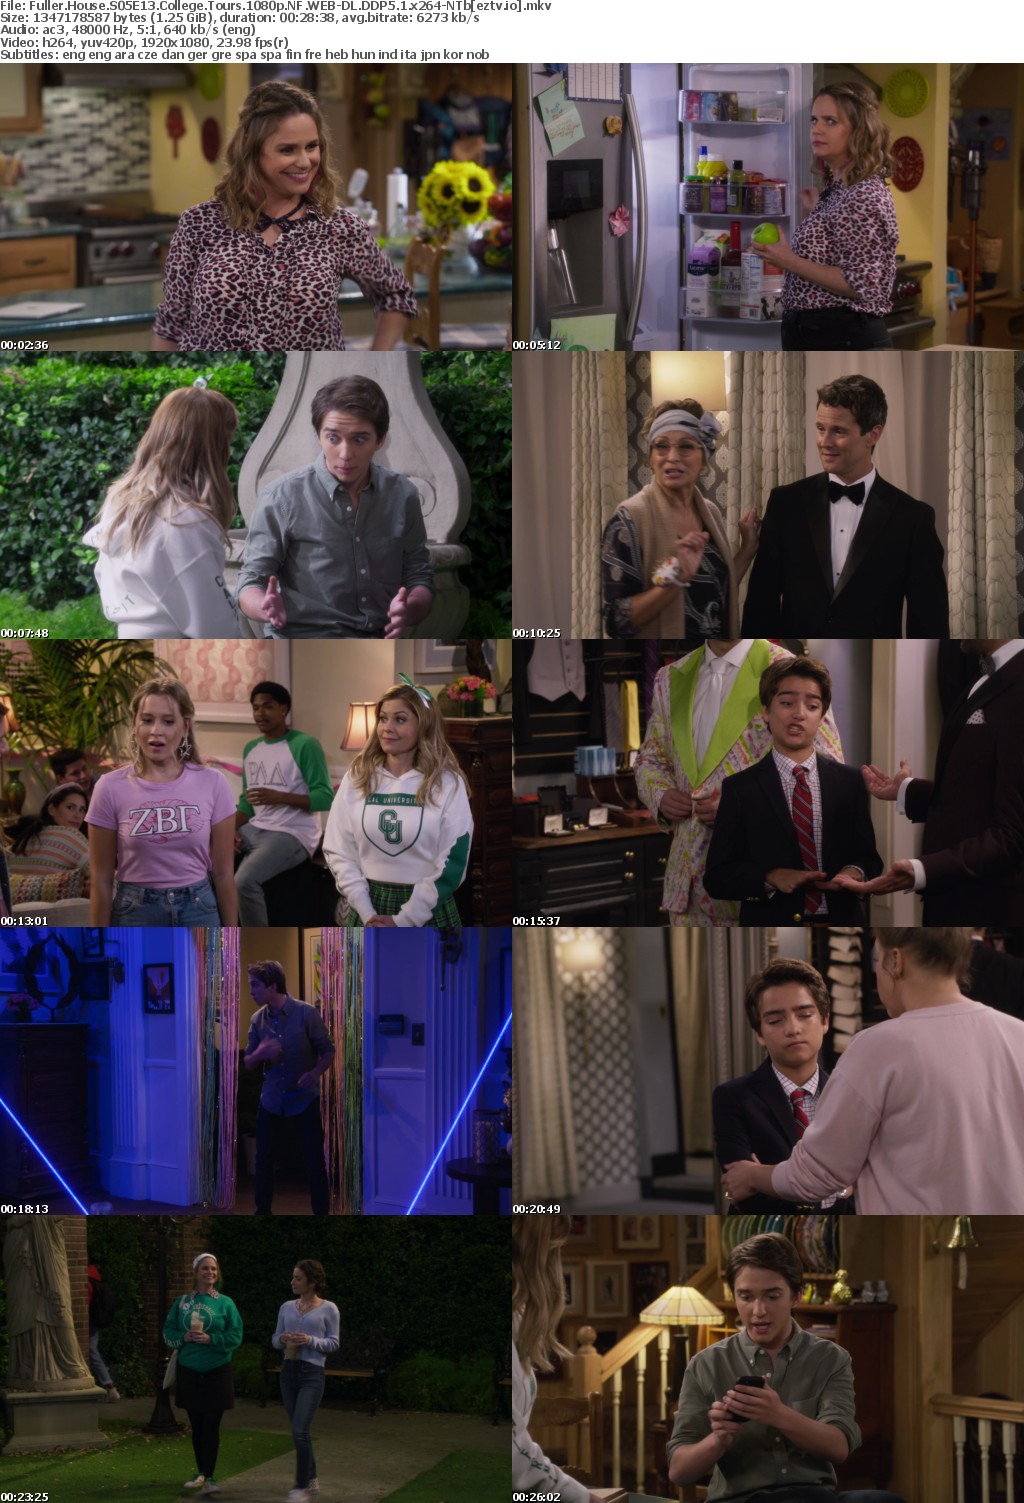 Fuller House S05E13 College Tours 1080p NF WEB-DL DDP5 1 x264-NTb